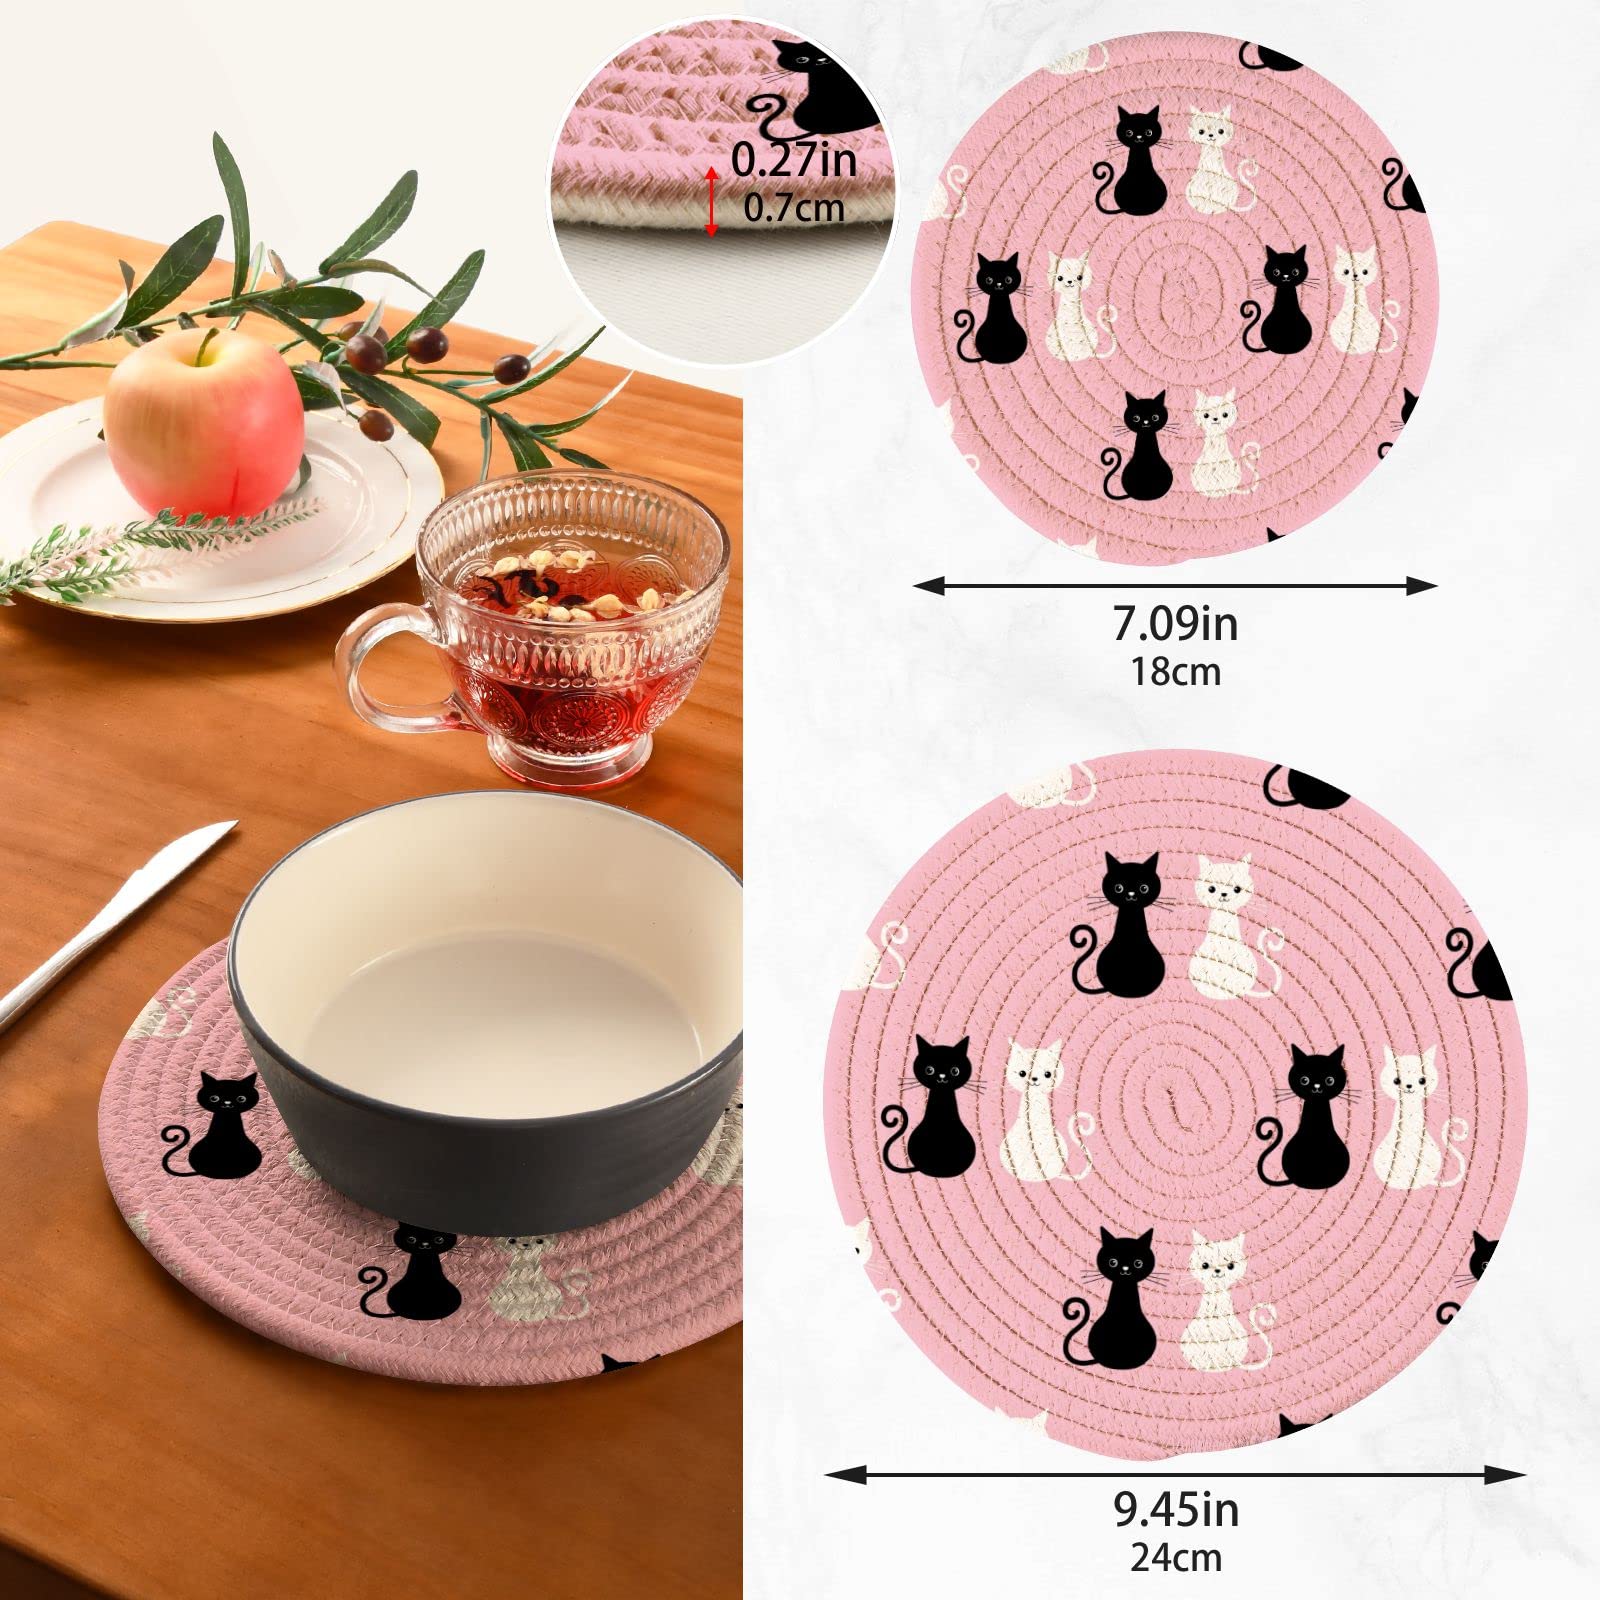 Black and White Cats Trivets for Hot Pots Dishes Heat Resistant,Kitten Pans Hot Mats Pads for Kitchen Decorative Counter Tops Dining Washable Pot Holder Coasters Set,Gift for Mom